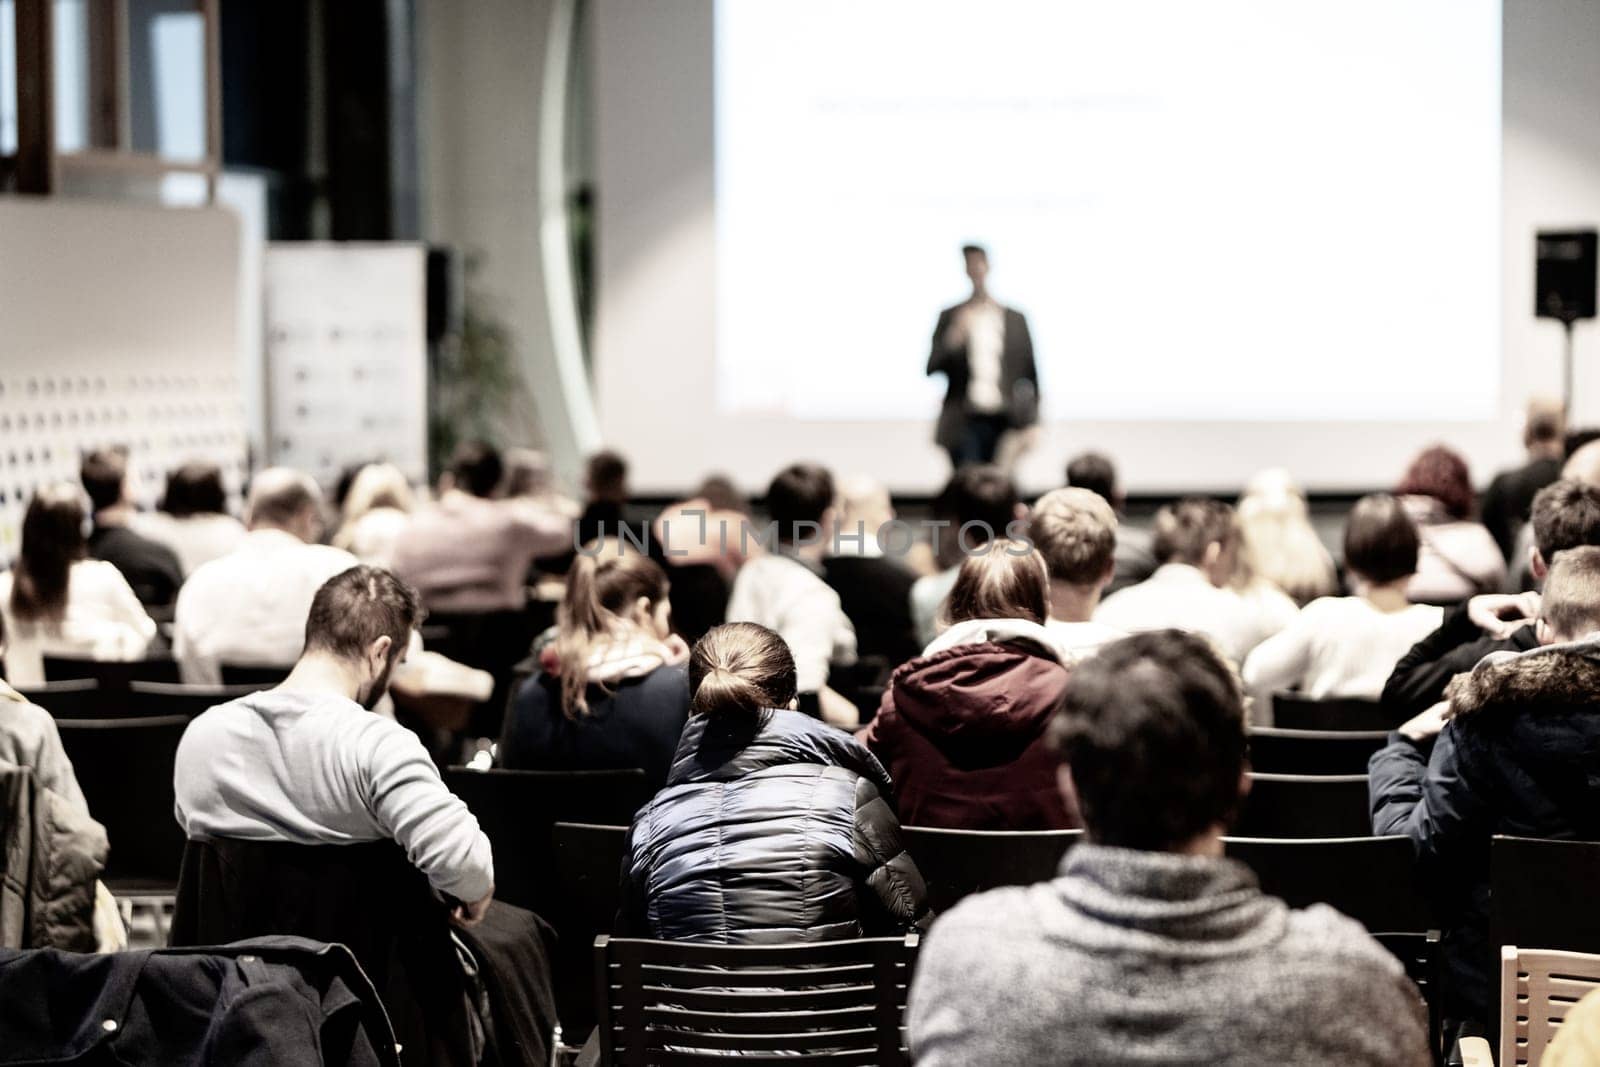 Speaker at Business Conference with Public Presentations. Audience at the conference hall. Entrepreneurship club. Rear view. Horisontal composition. Background blur by kasto